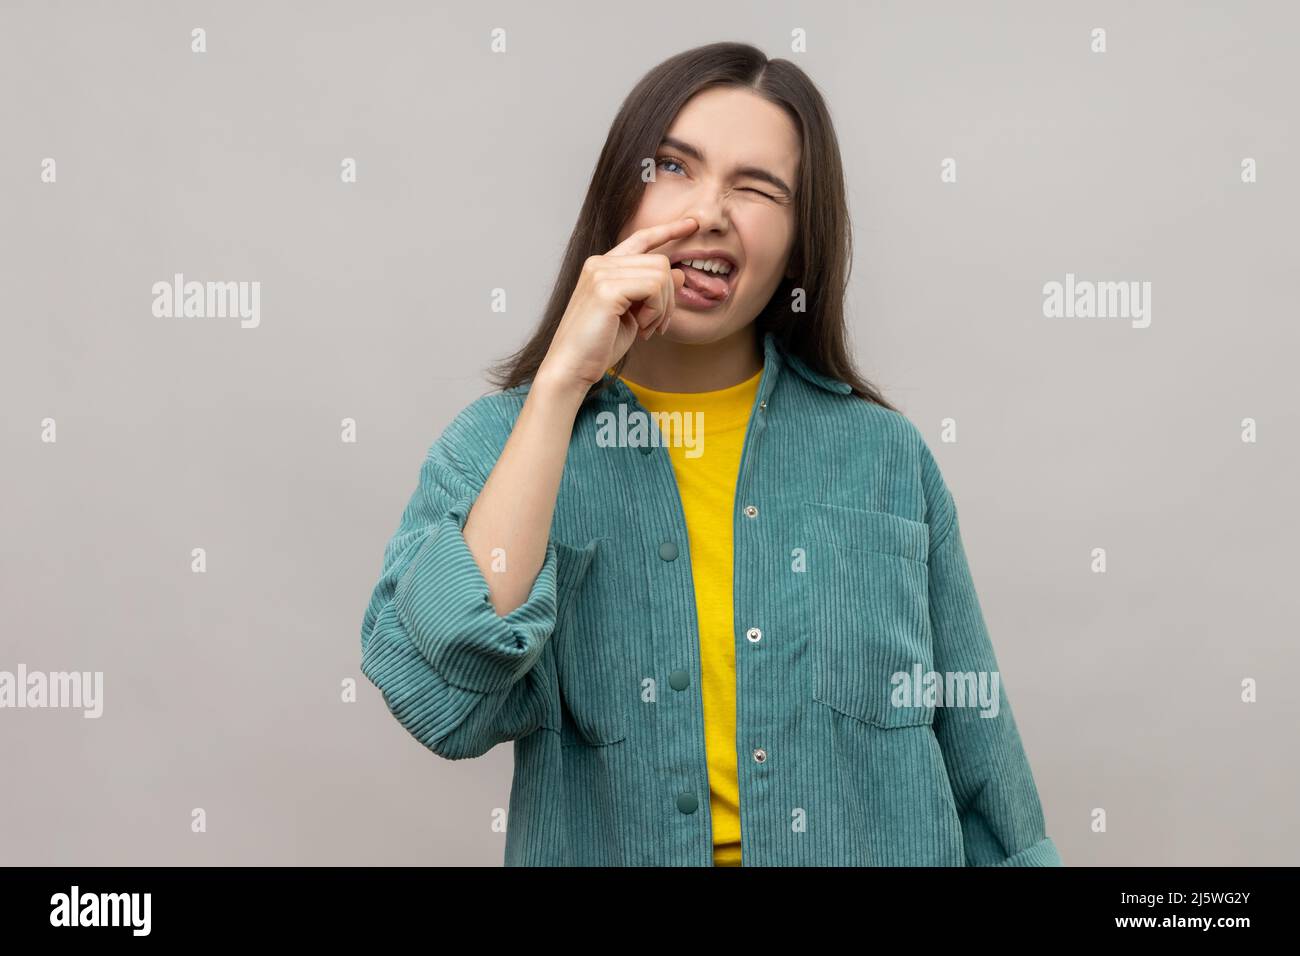 Portrait of funny woman putting finger into her nose and showing tongue, fooling around, bad habits, disrespectful behavior, wearing casual style jacket. Indoor studio shot isolated on gray background Stock Photo